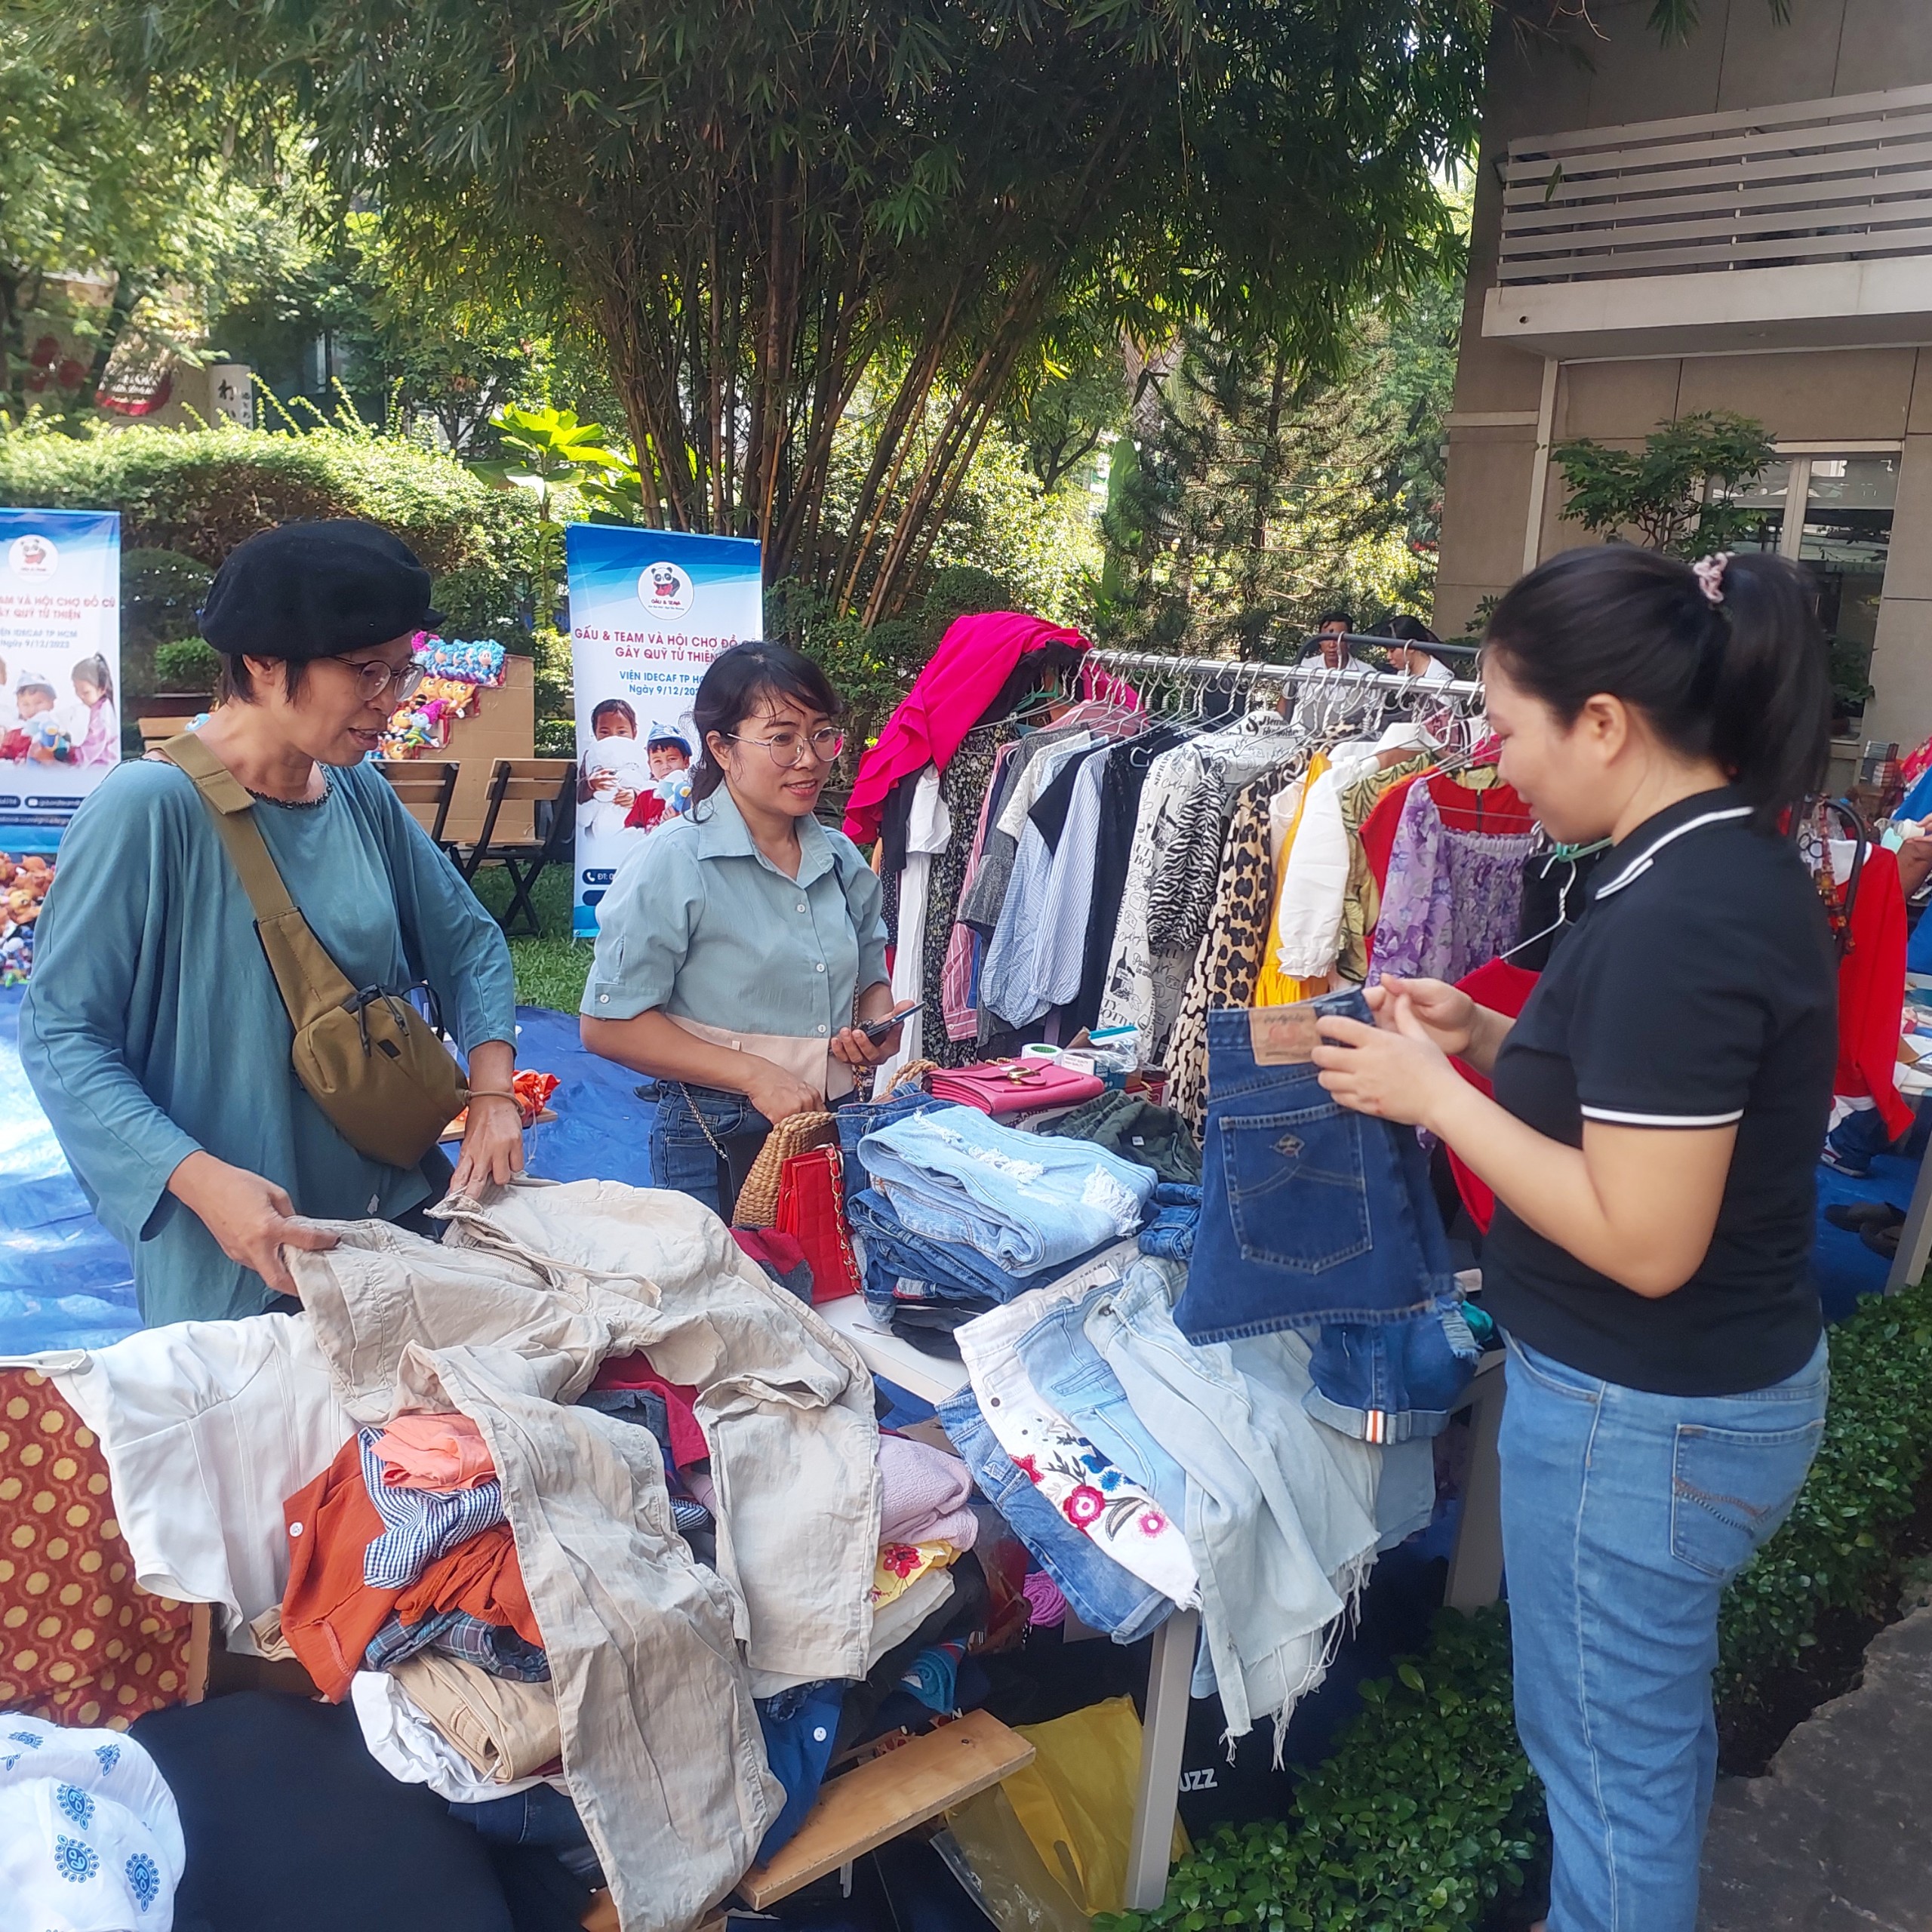 Customers visit and shop at a handmade goods stall. Photo: Minh Chau / Tuoi Tre News